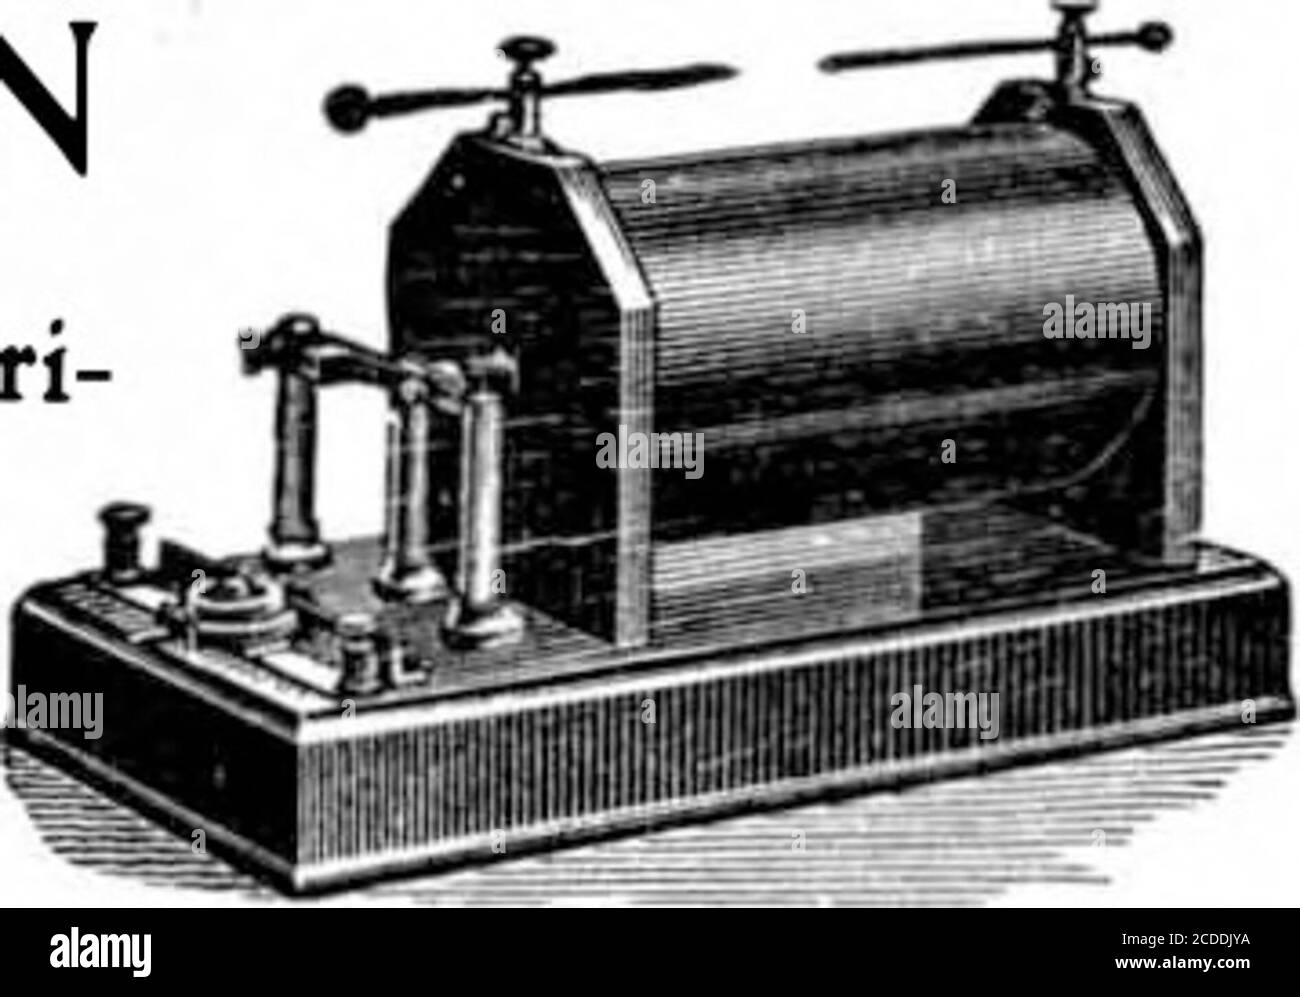 . Scientific American Volume 86 Number 14 (April 1902) . INDUCTION w J 1 Lo for experi-ments in X rays andother electrical work.tW Catalogue Free.E. S. RITCHIE & SONS, Brookline, Mass.. MACHINE WORK WANTED Have your Model** of Engine** etc., made, and smallMachine Work done in a thoroughly equipped ma-chine shop. Estimates cheerfully given.II. BAICTOL BKA/IKR, Engineer and Machinist, Manufacturer of Gasoline Vehicles, 1811.18.10 Fltzuater Street, Philadelphia, Pa. MILLS F0RALLMATER1ALS. OUR BUSINESS IS TO MAKEMACHINERY FOR GRINDINGGRAIN, CRUSHING ROCKS ANDPULVERIZING ALL HARD SUB-STANCES. WE Stock Photo